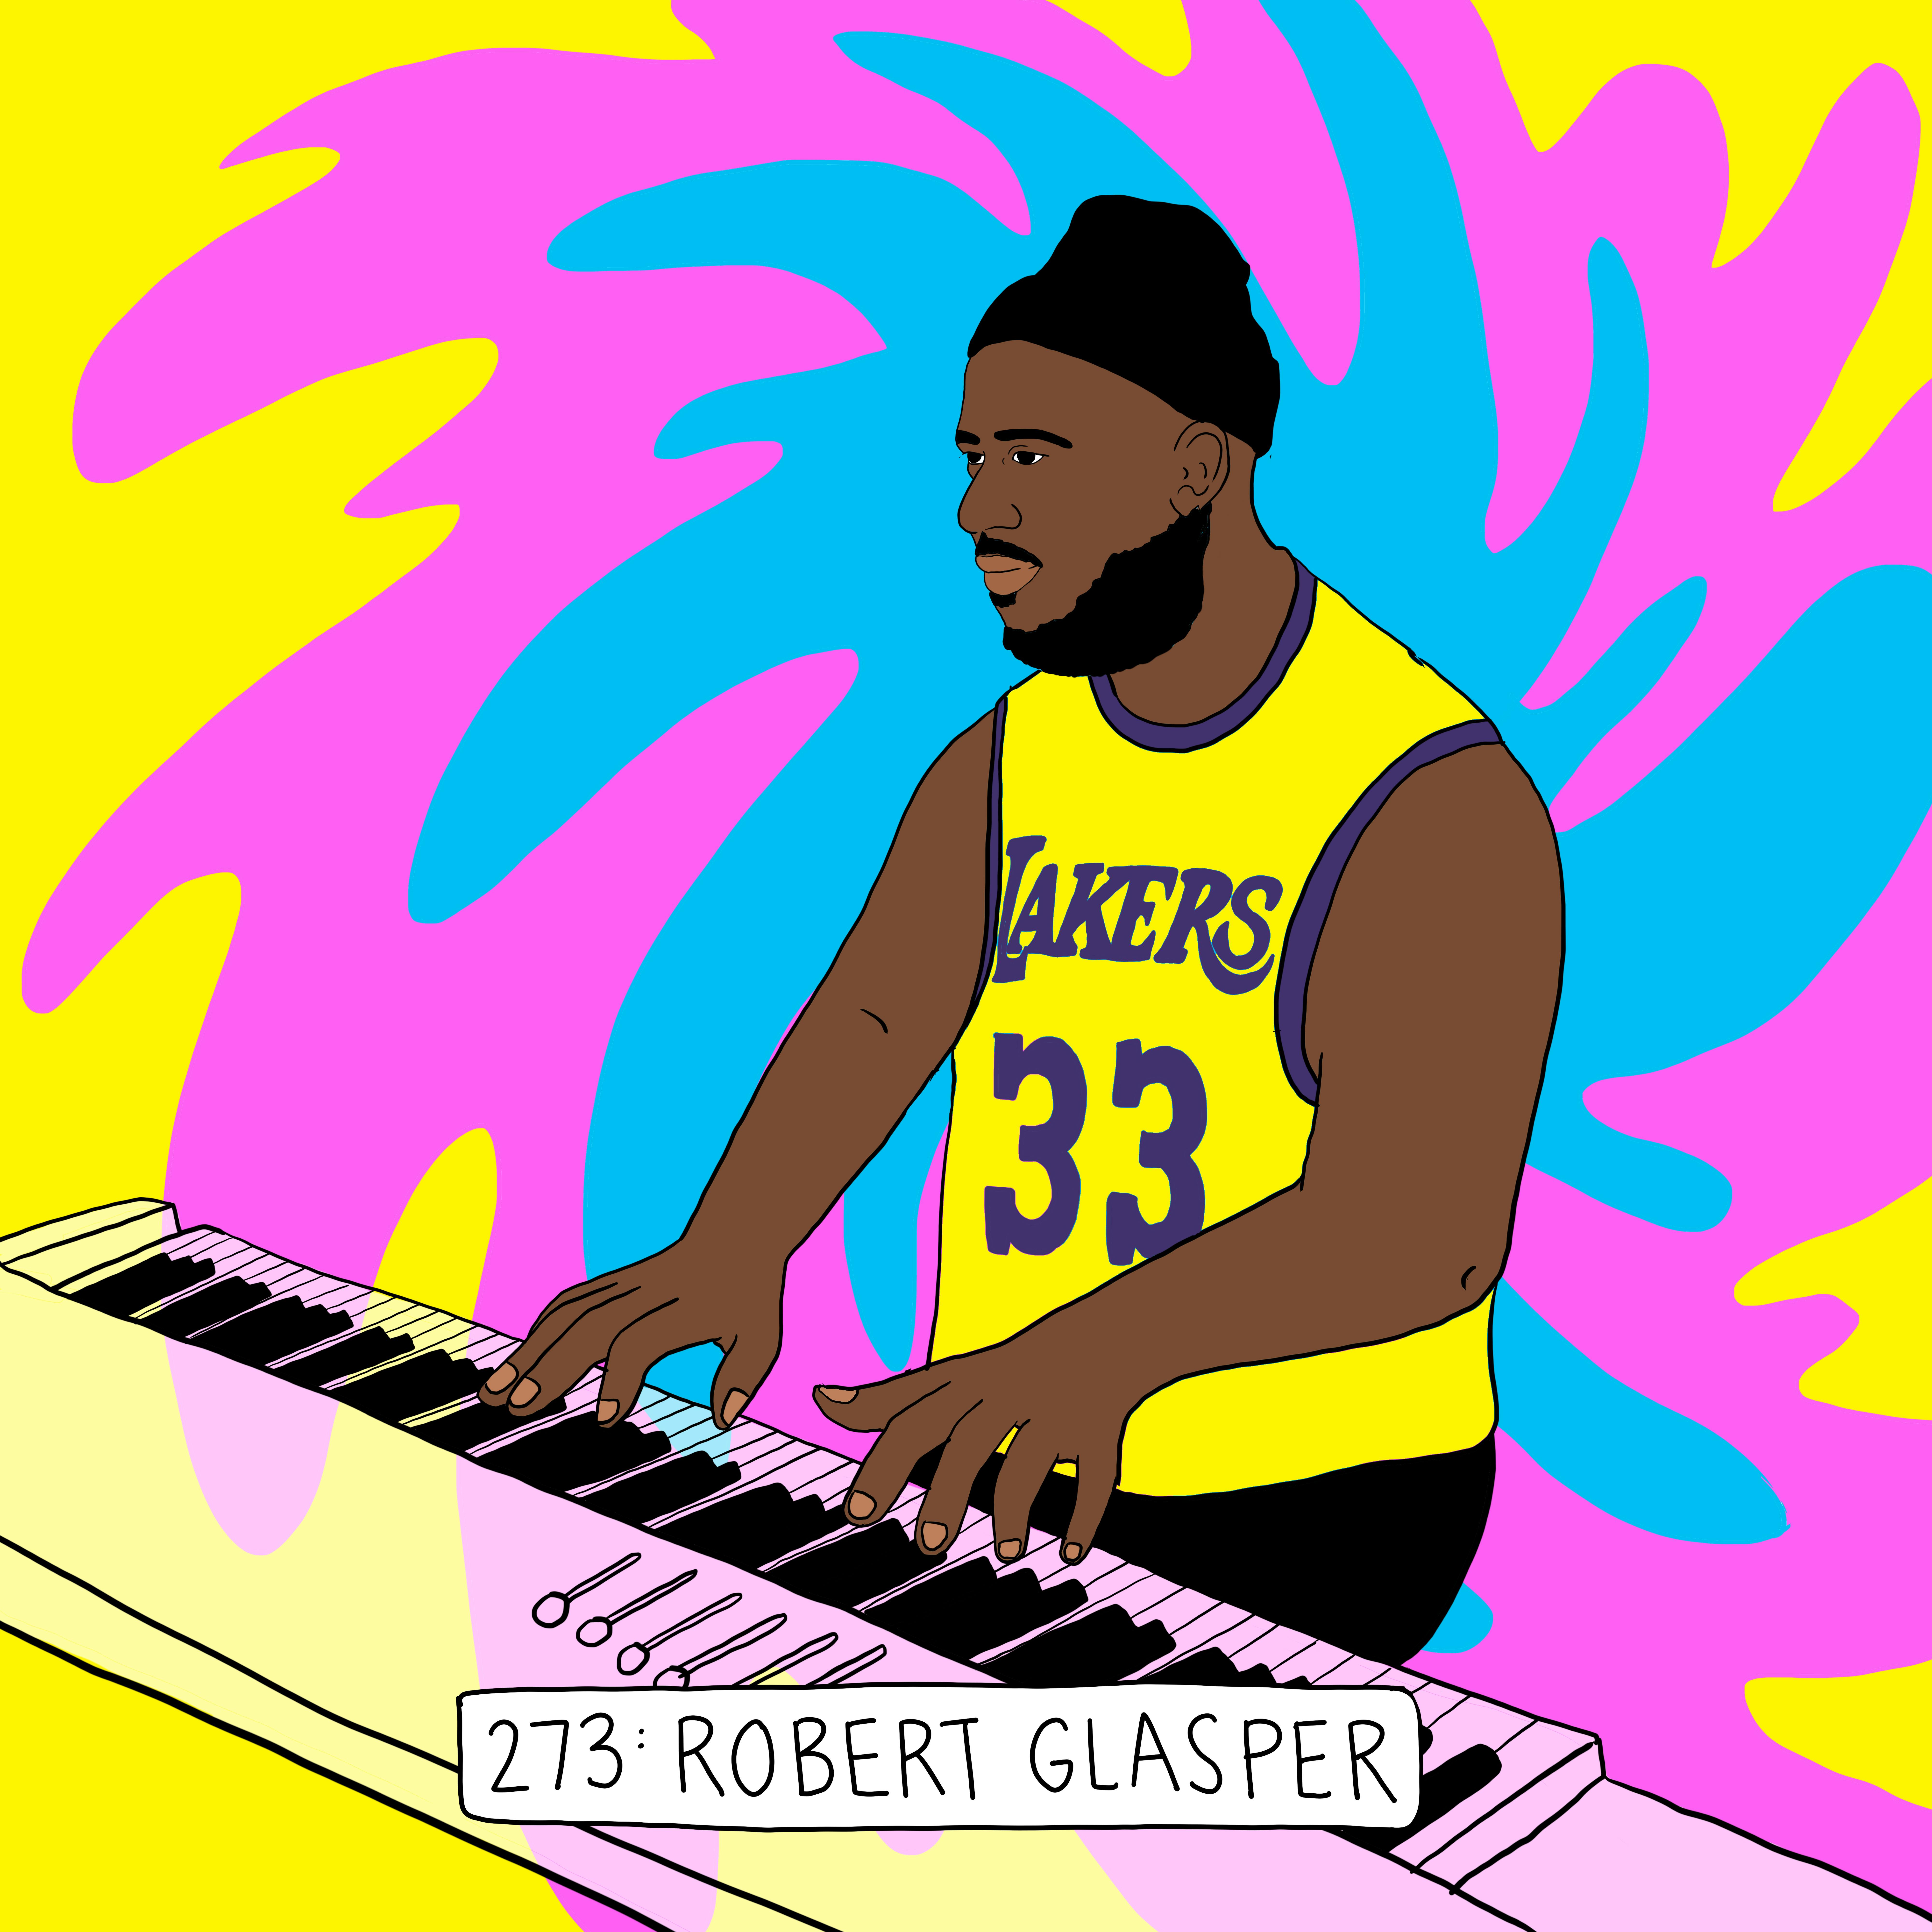 Robert Glasper on jazz, basketball, and his score for ”Winning Time”